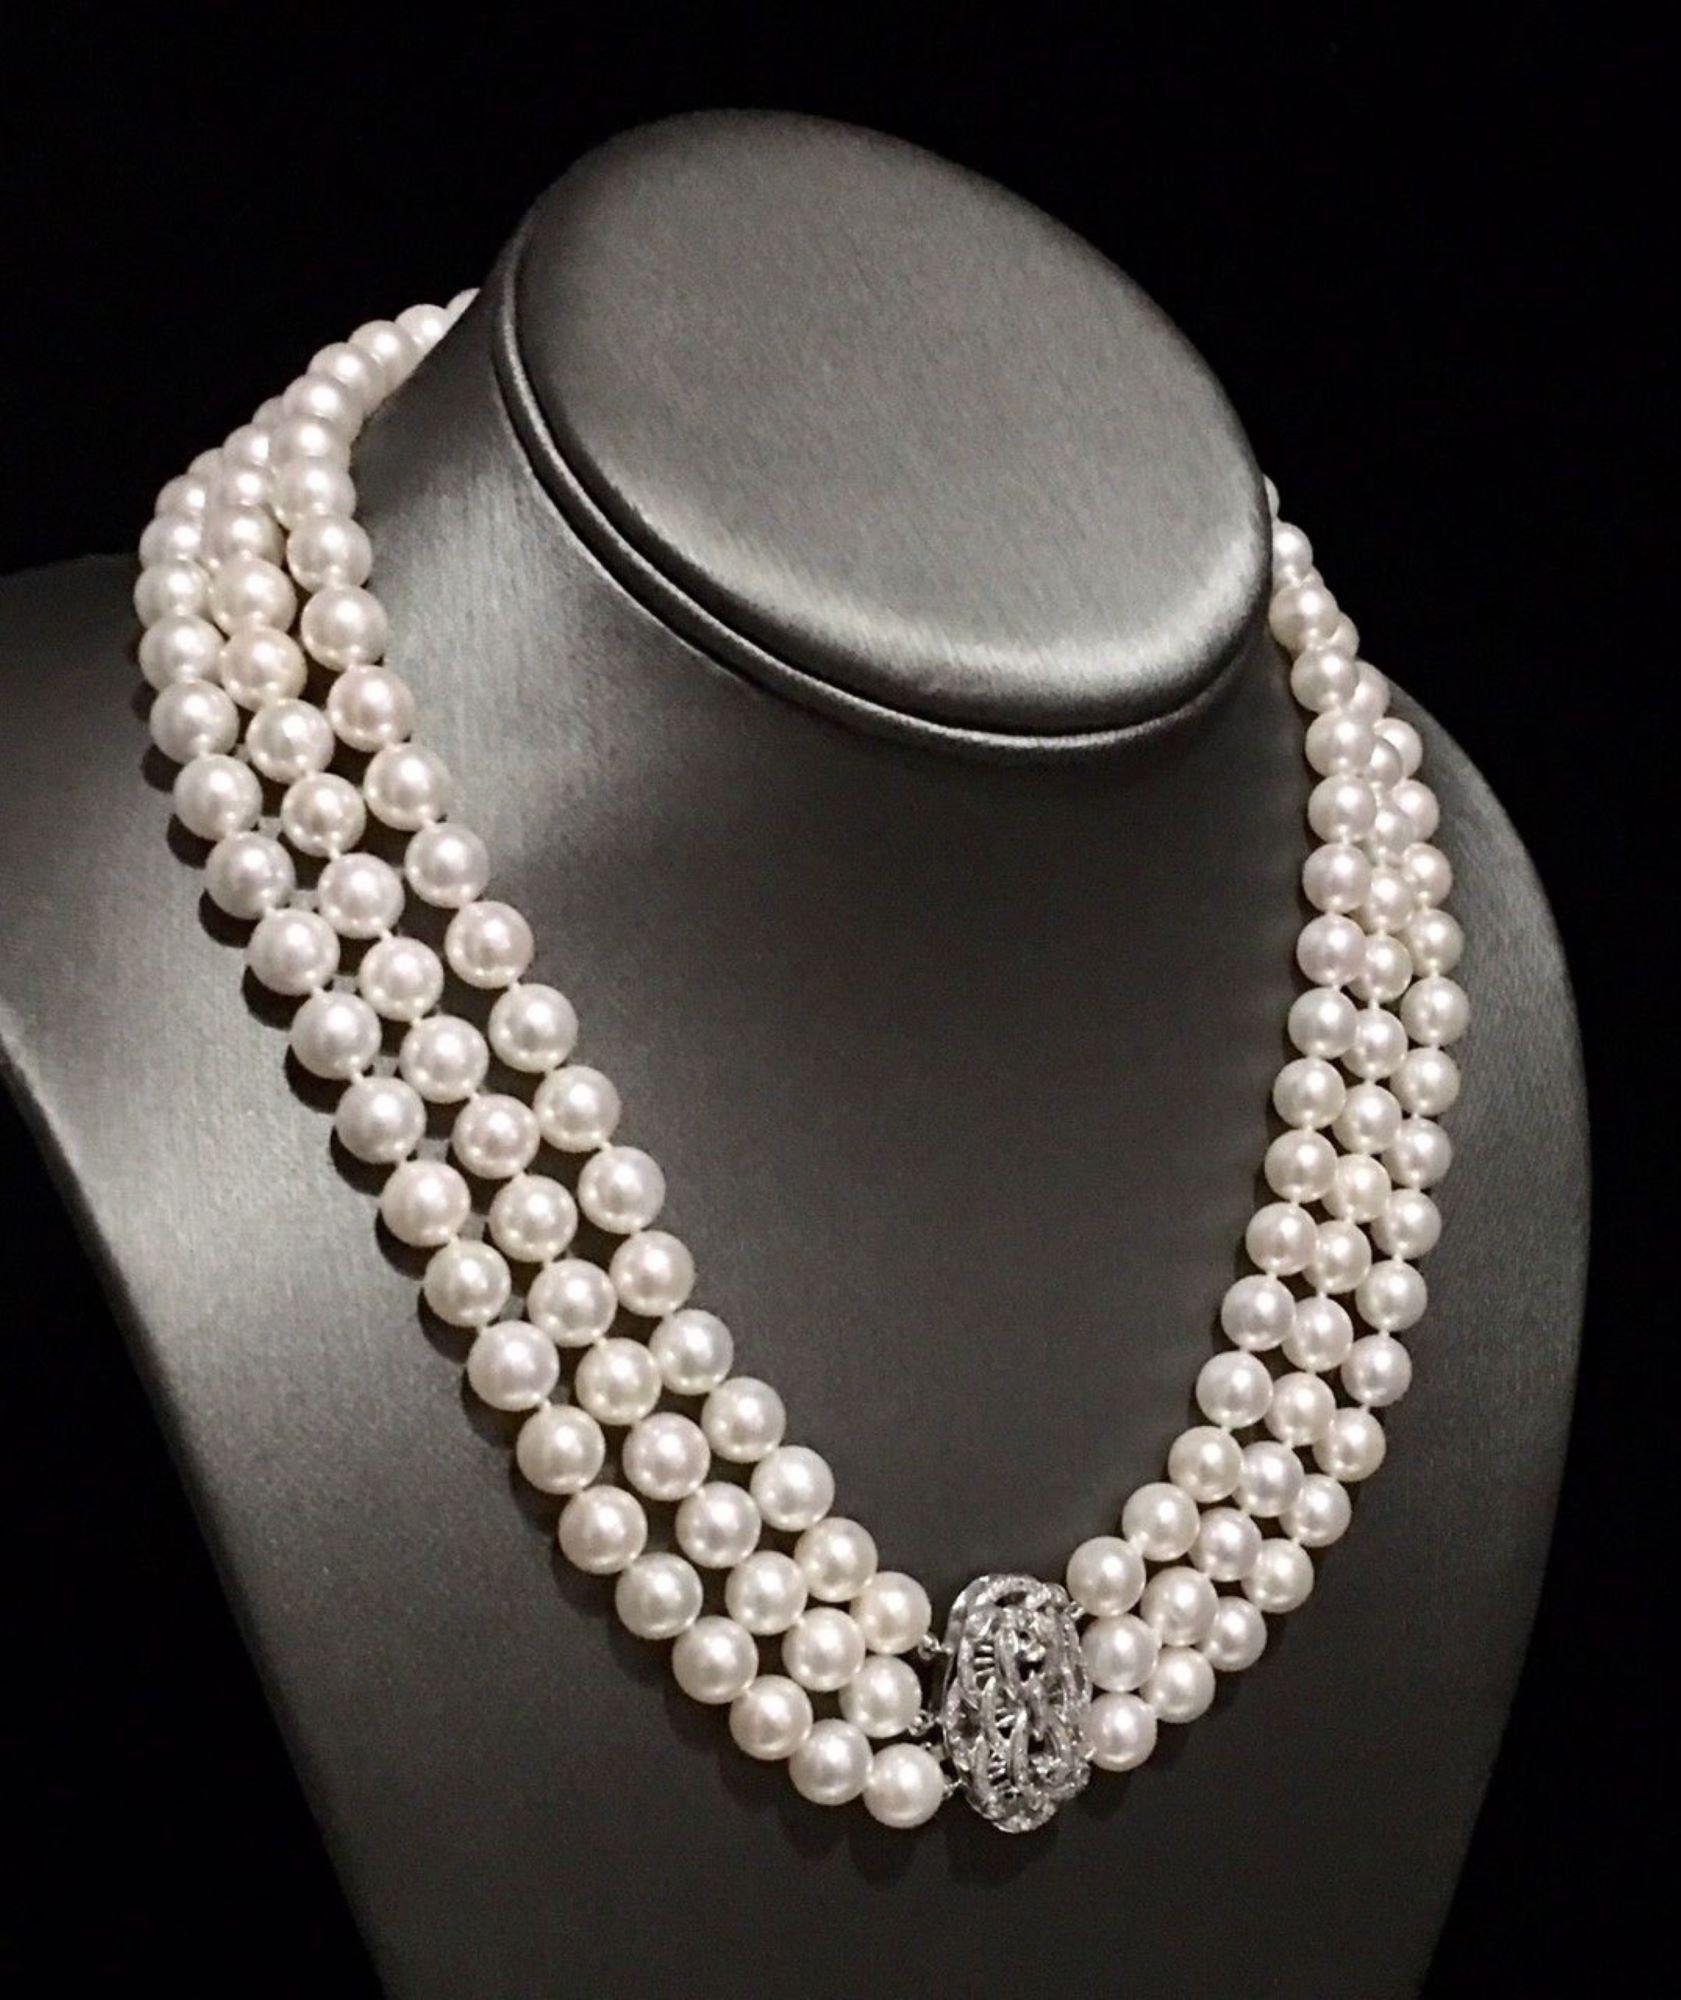 CERTIFIED $12.975 FINE QUALITY AUTHENTIC AKOYA PEARL TRIPLE STRAND LARGE 8.00-7.50 MM 19.5-17.5 WITH AN EXQUISITE 14 KT DIAMOND CLASP
This is a one of a kind Custom Made Unique Large Akoya Pearl Triple Strand Hi Fashion Diamond Necklace.
Truly a